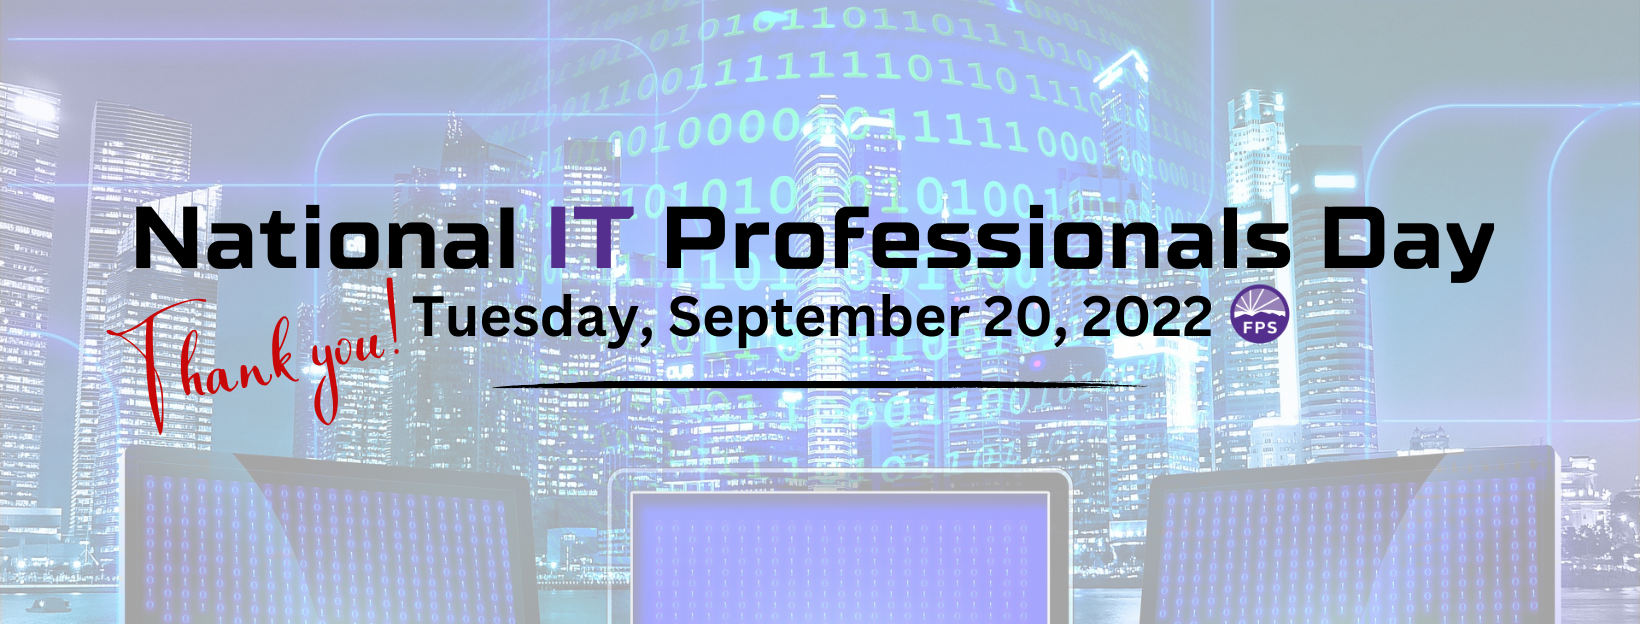 National IT Professionals Day - Tuesday, Sept 20, 2022